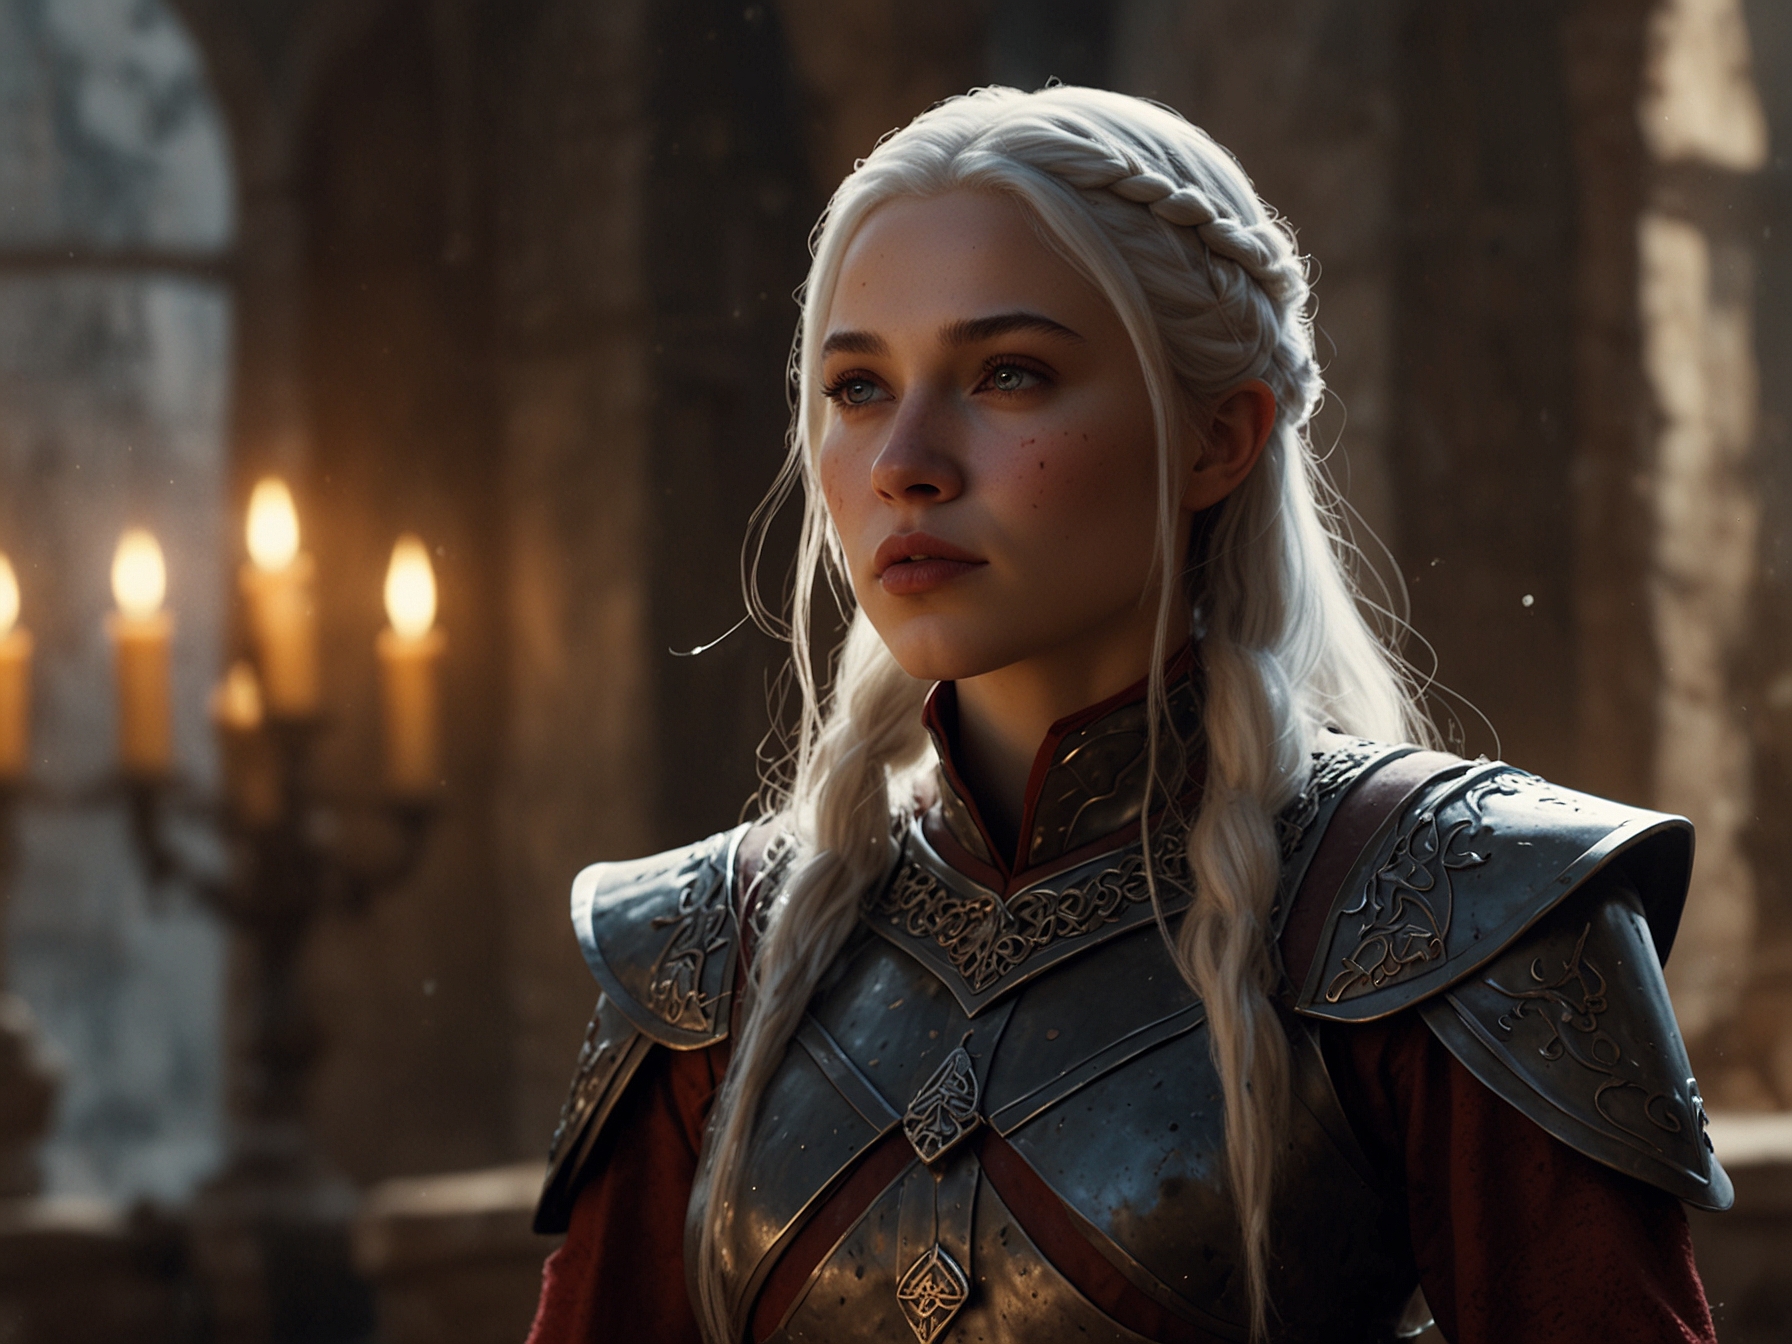 Rhaenyra Targaryen stands determined in a regal setting, preparing for her perilous journey to confront Alicent Hightower in a bid to prevent war. Her resolve is palpable.